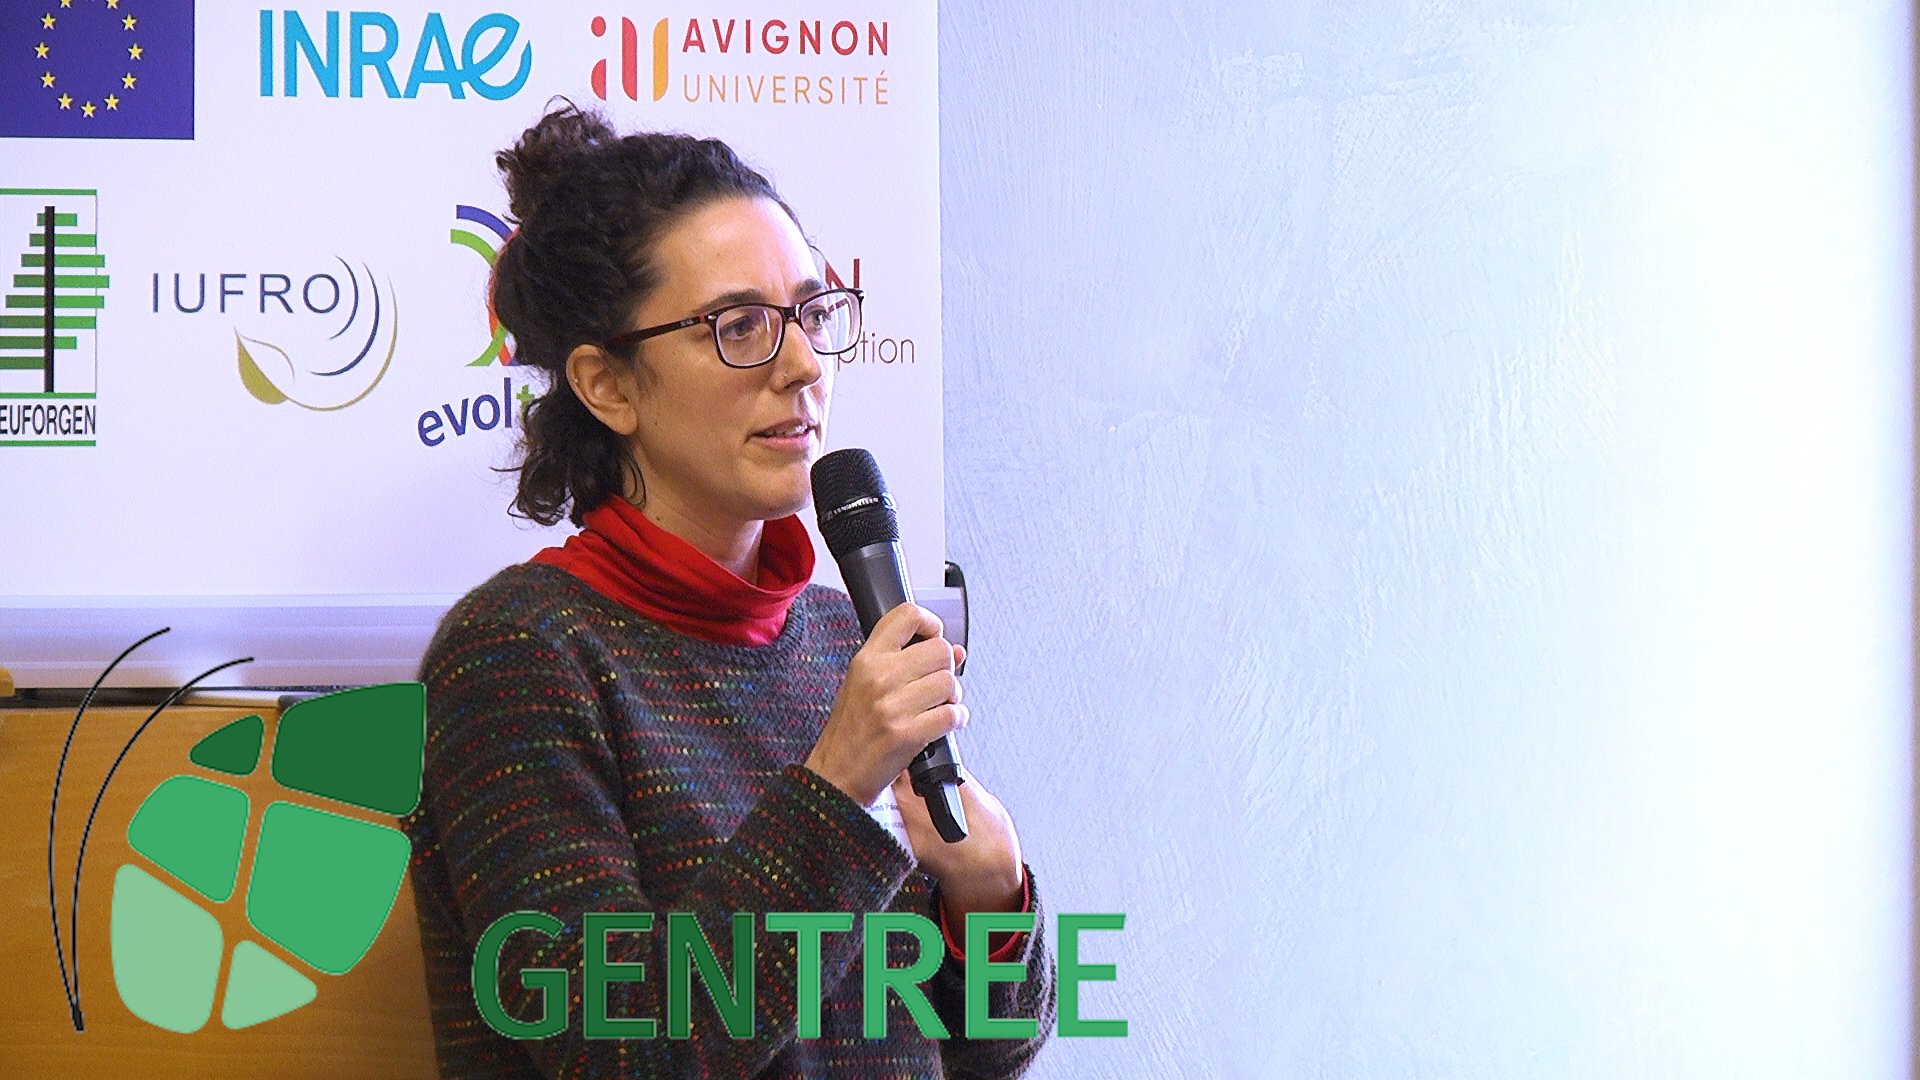 [COLLOQUE] GENTREE Final Conference 27-31 January 2020 séance 10